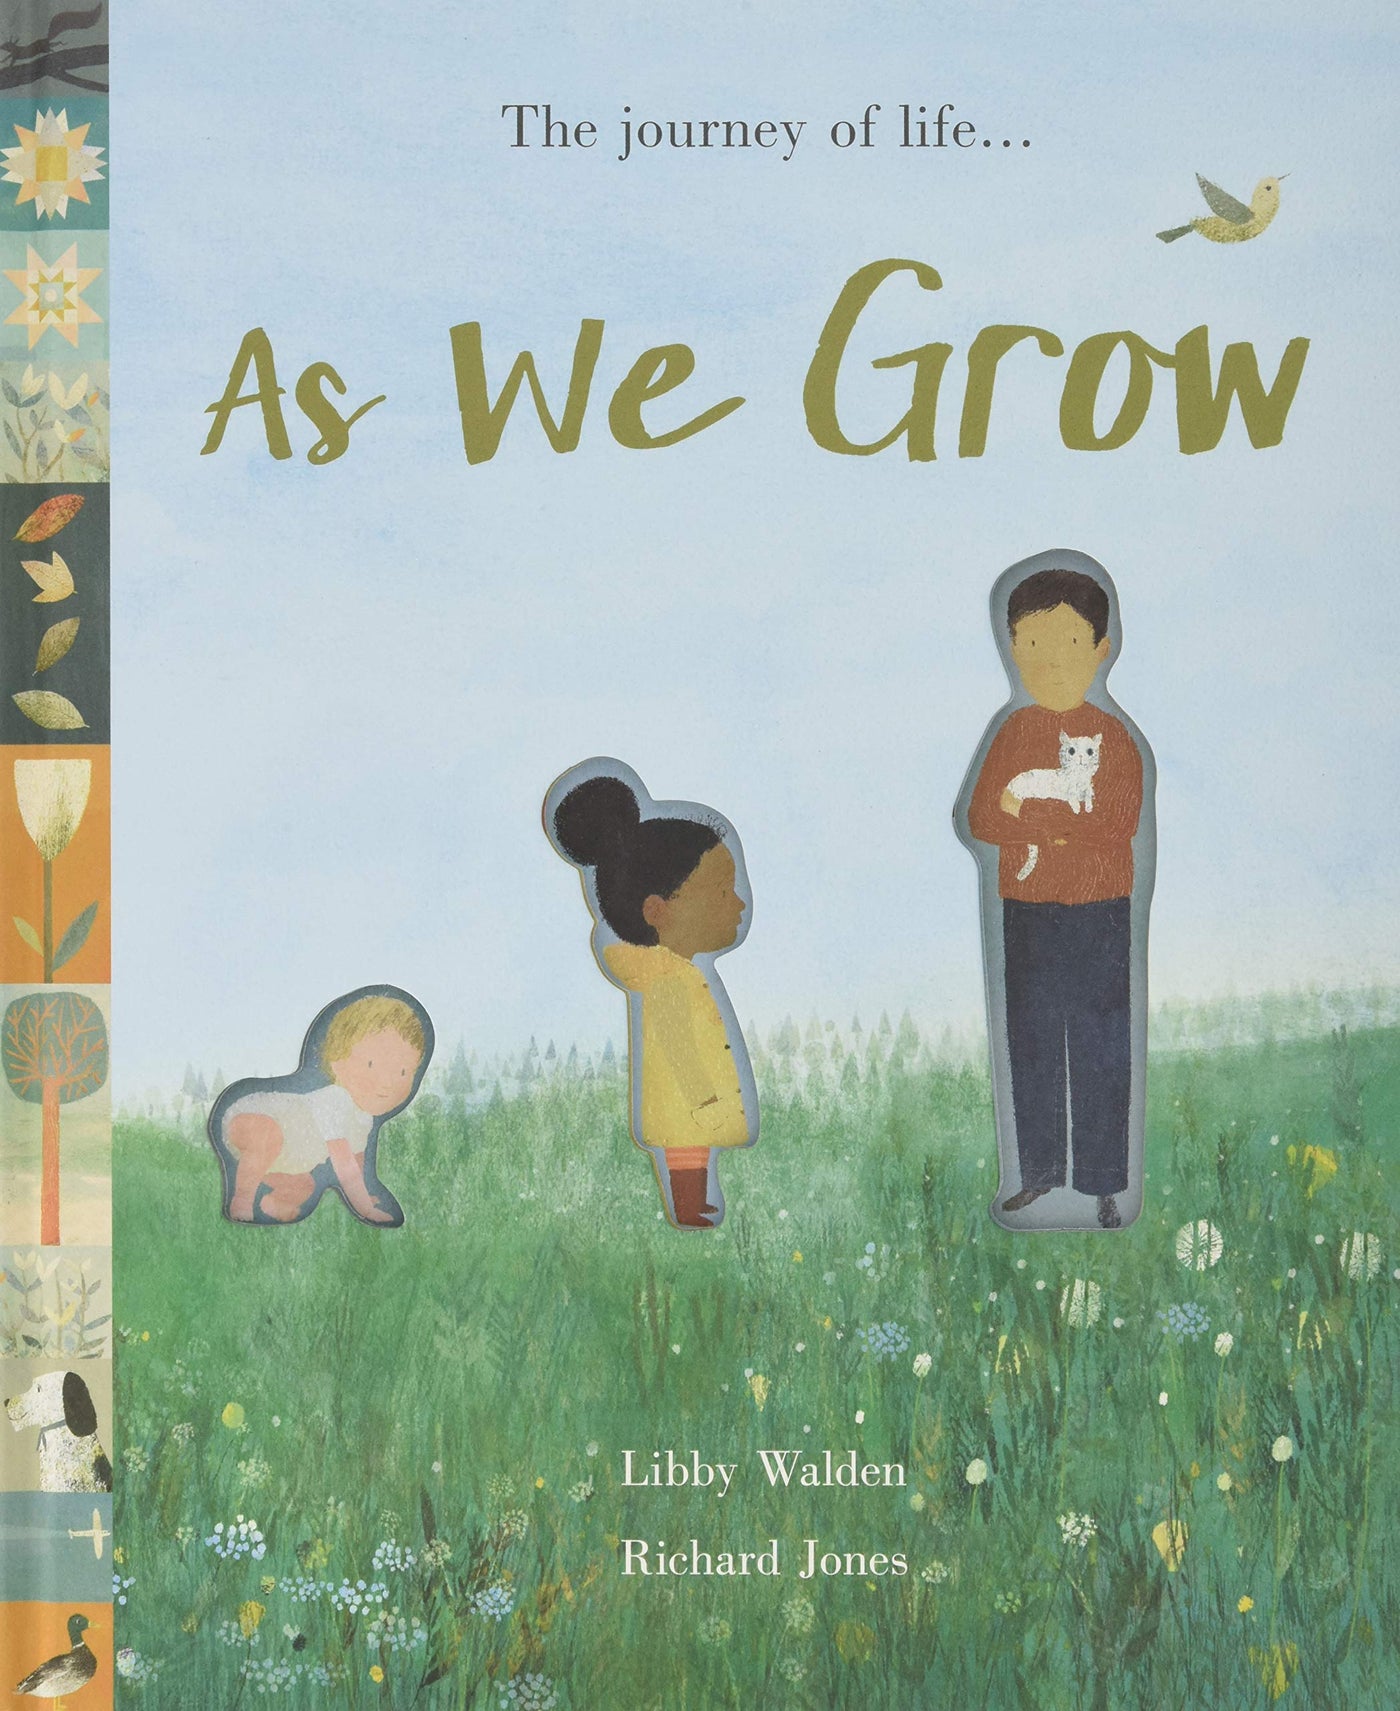 As We Grow: The journey of life... (Paperback)